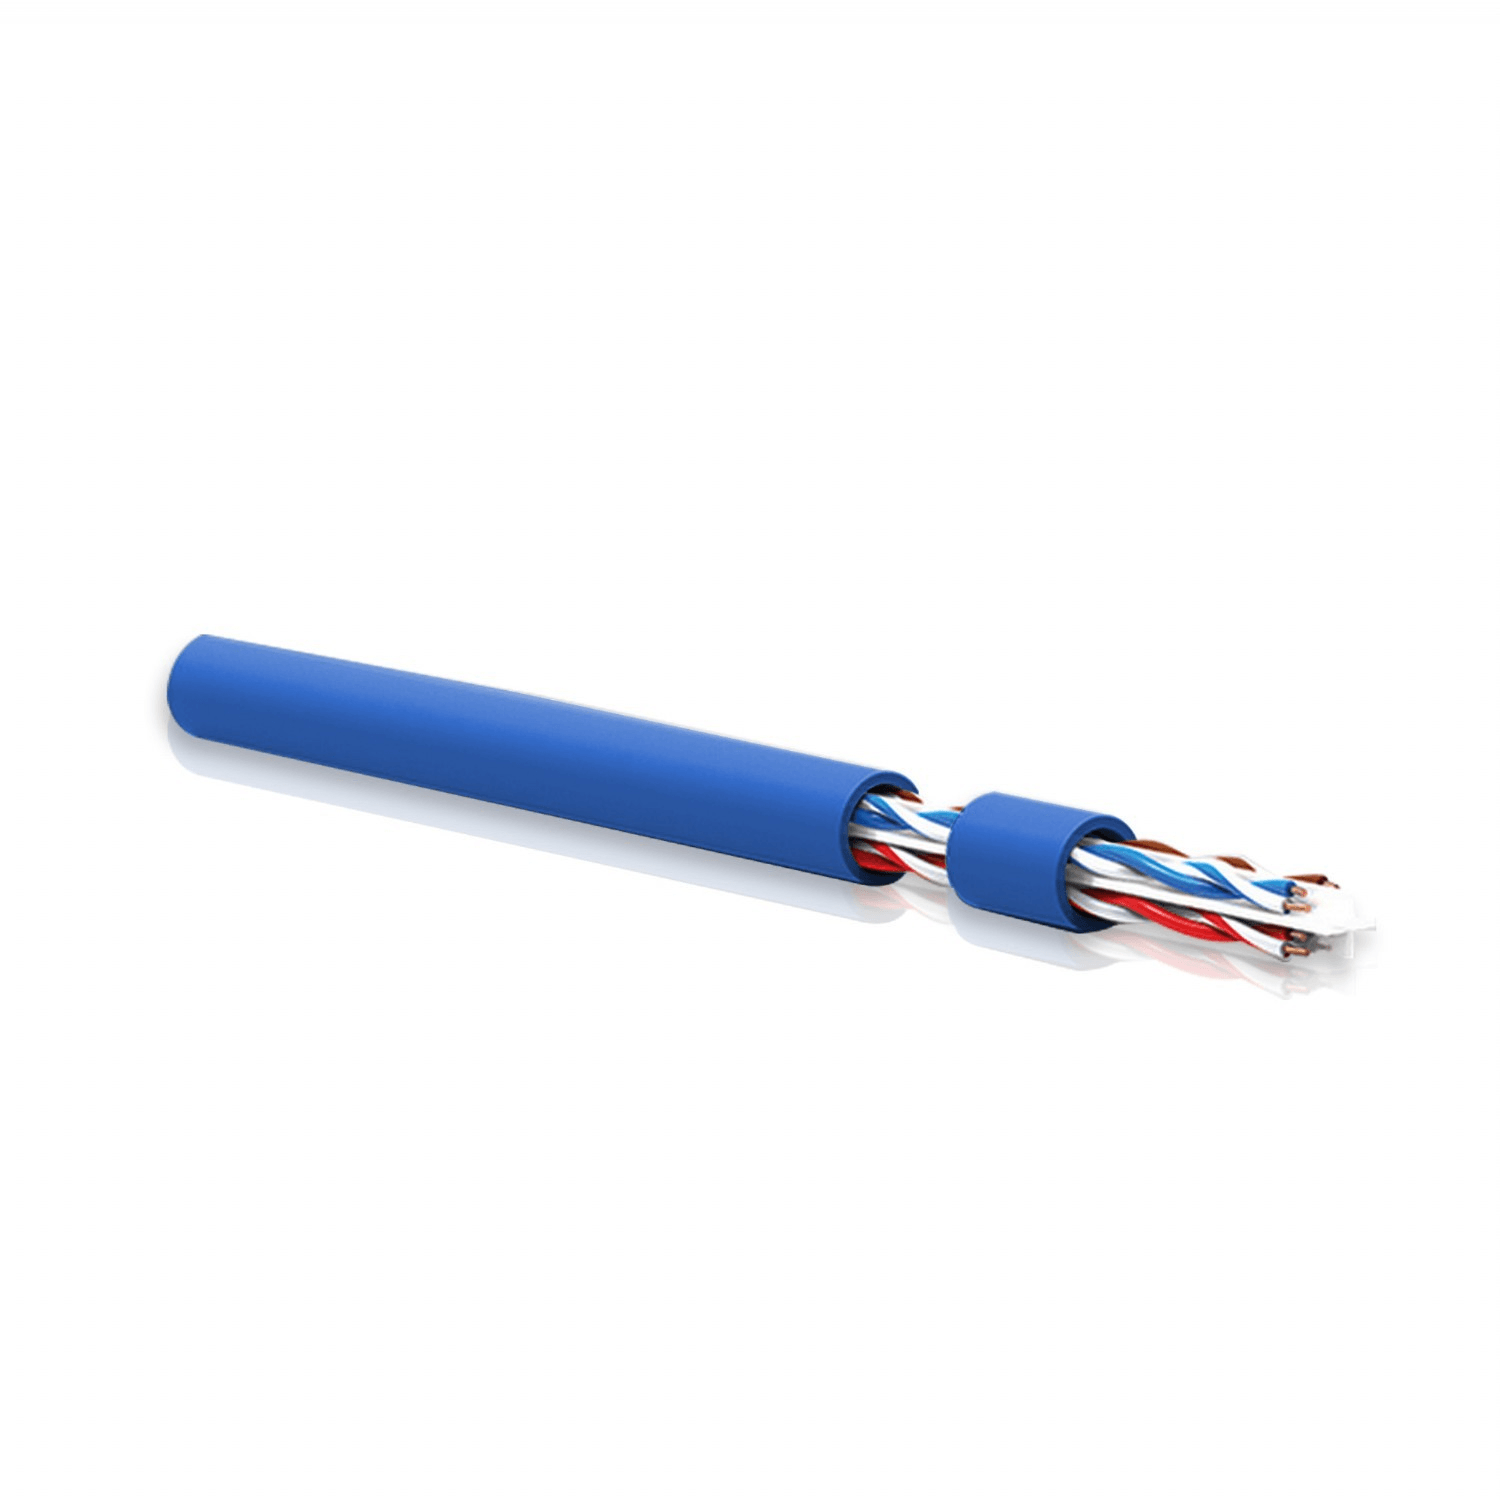 ICAT6-305M HIGH SPEED NETWORK CABLE 23 AWG 